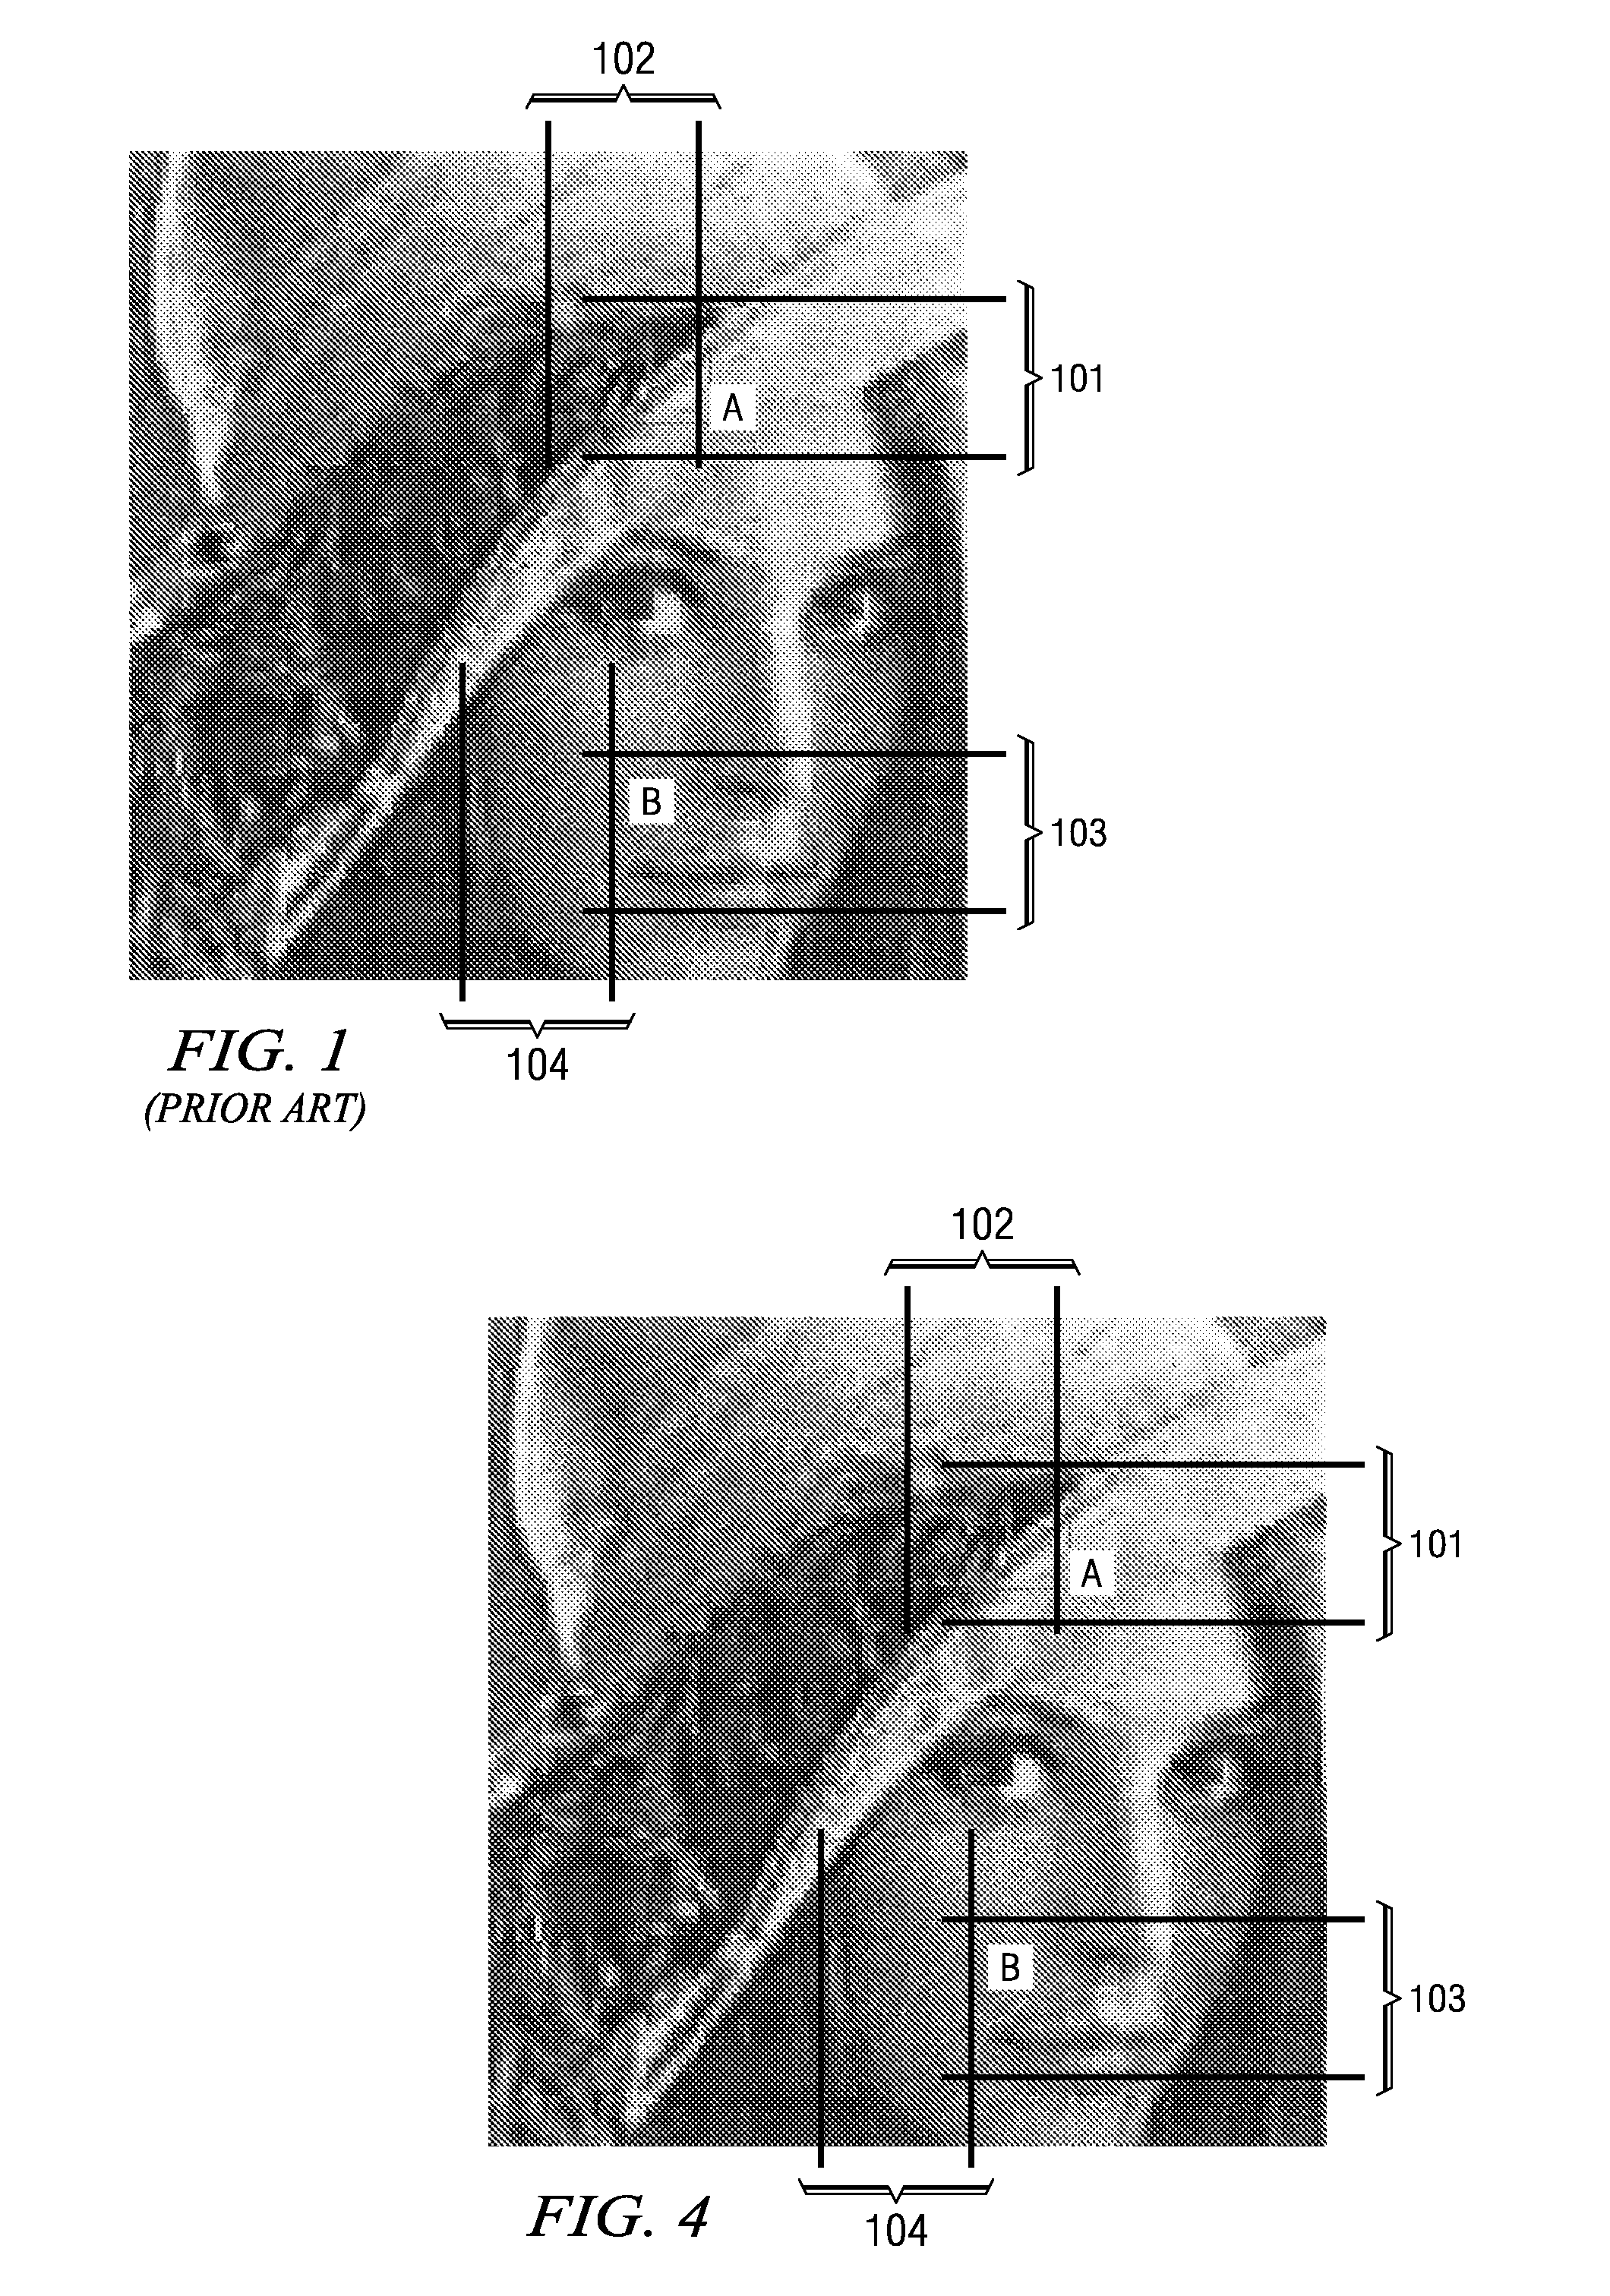 Post-processing technique for noise reduction of DCT-based compressed images